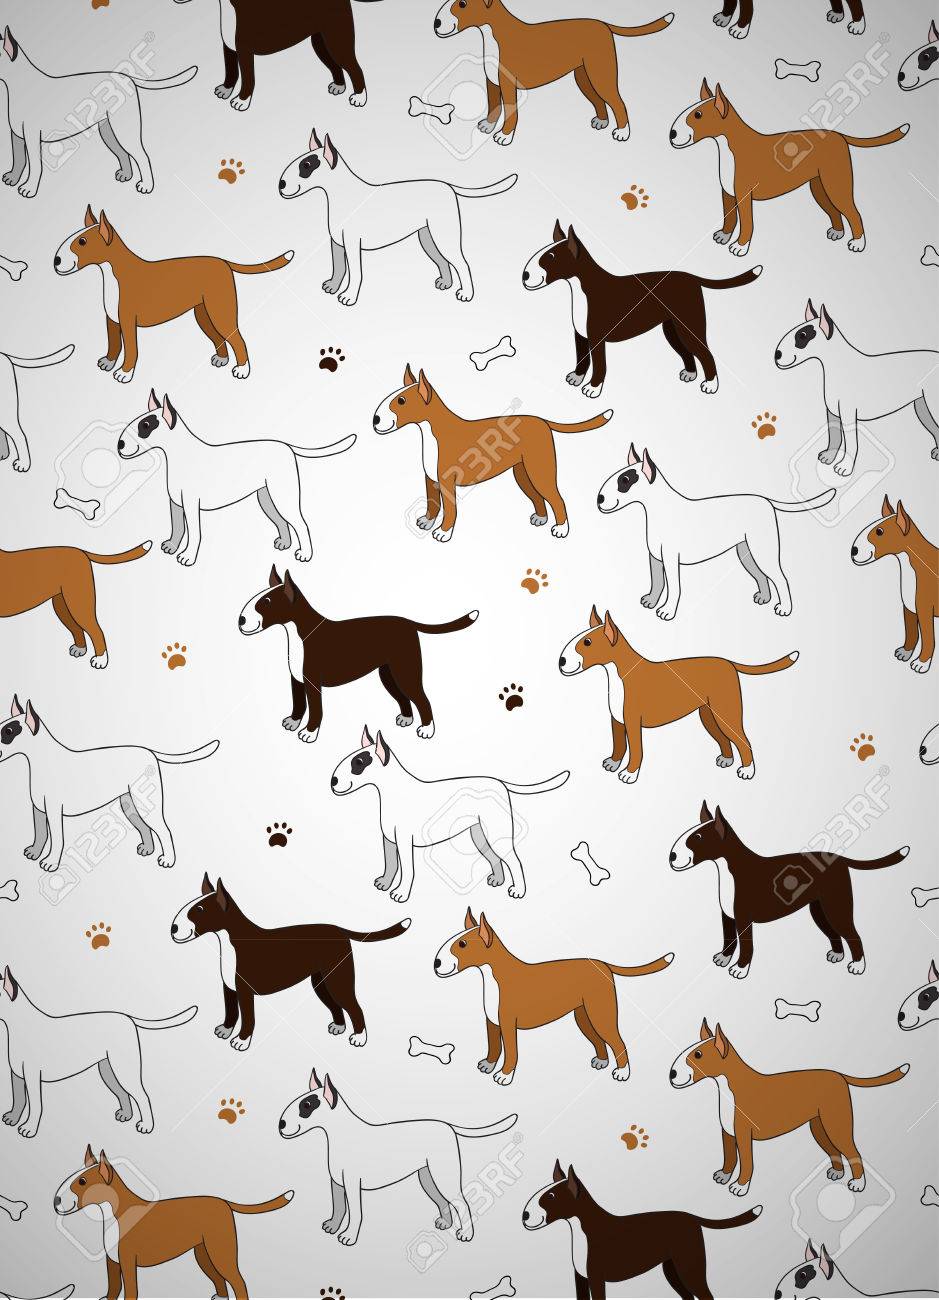 Awesome Greeting Card With Cute Cartoon Dogs Breed Bullterier